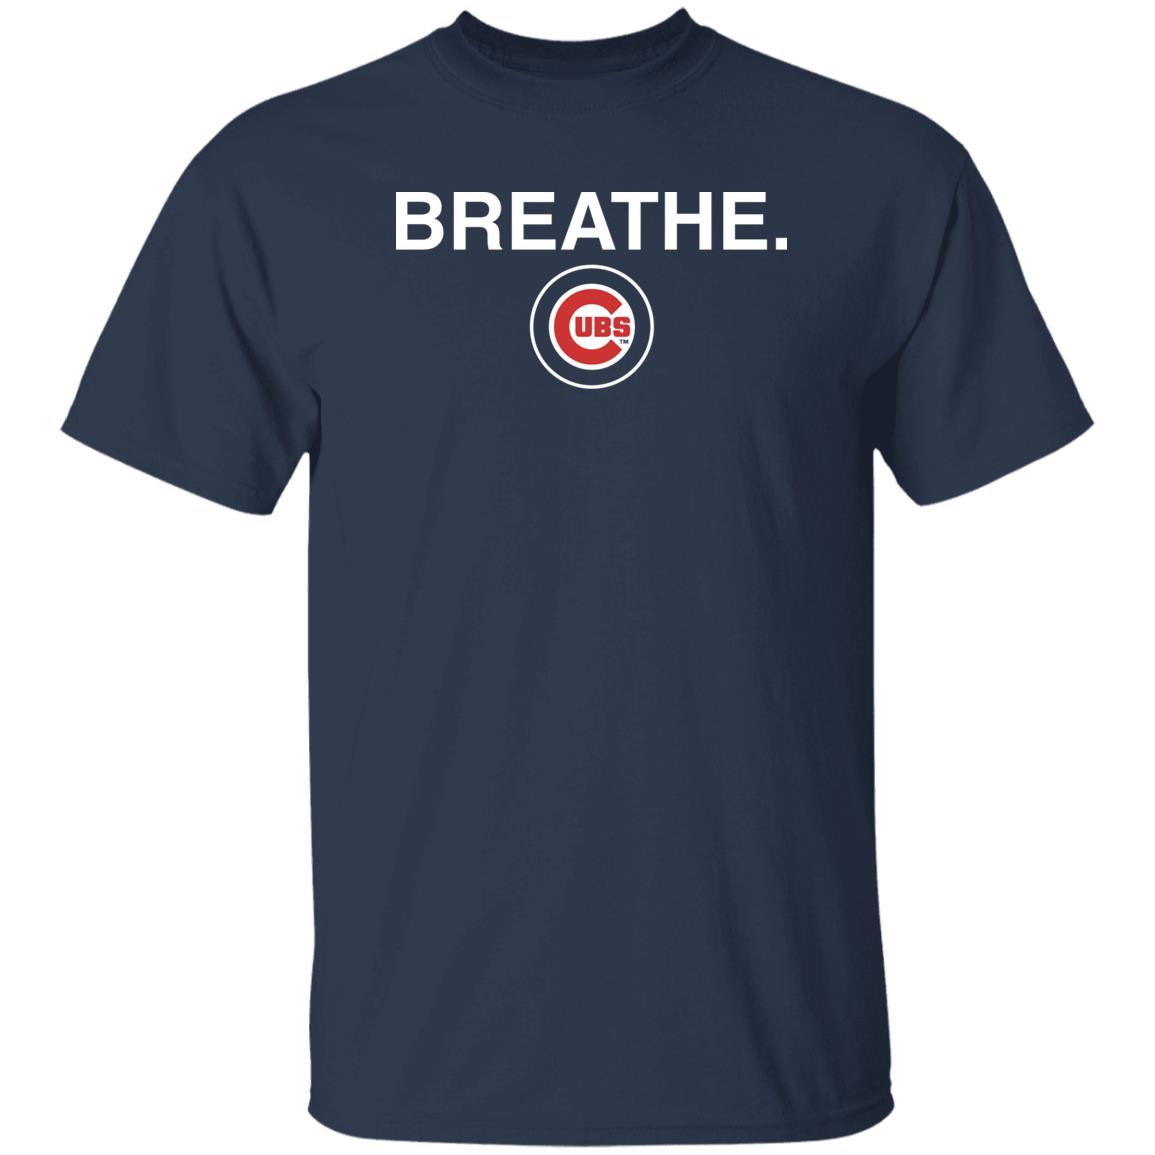 Obvious Shirts Store Breathe Ubs Shirt Iron Happ Breathe Ubs T Shirt Chicago Cubs